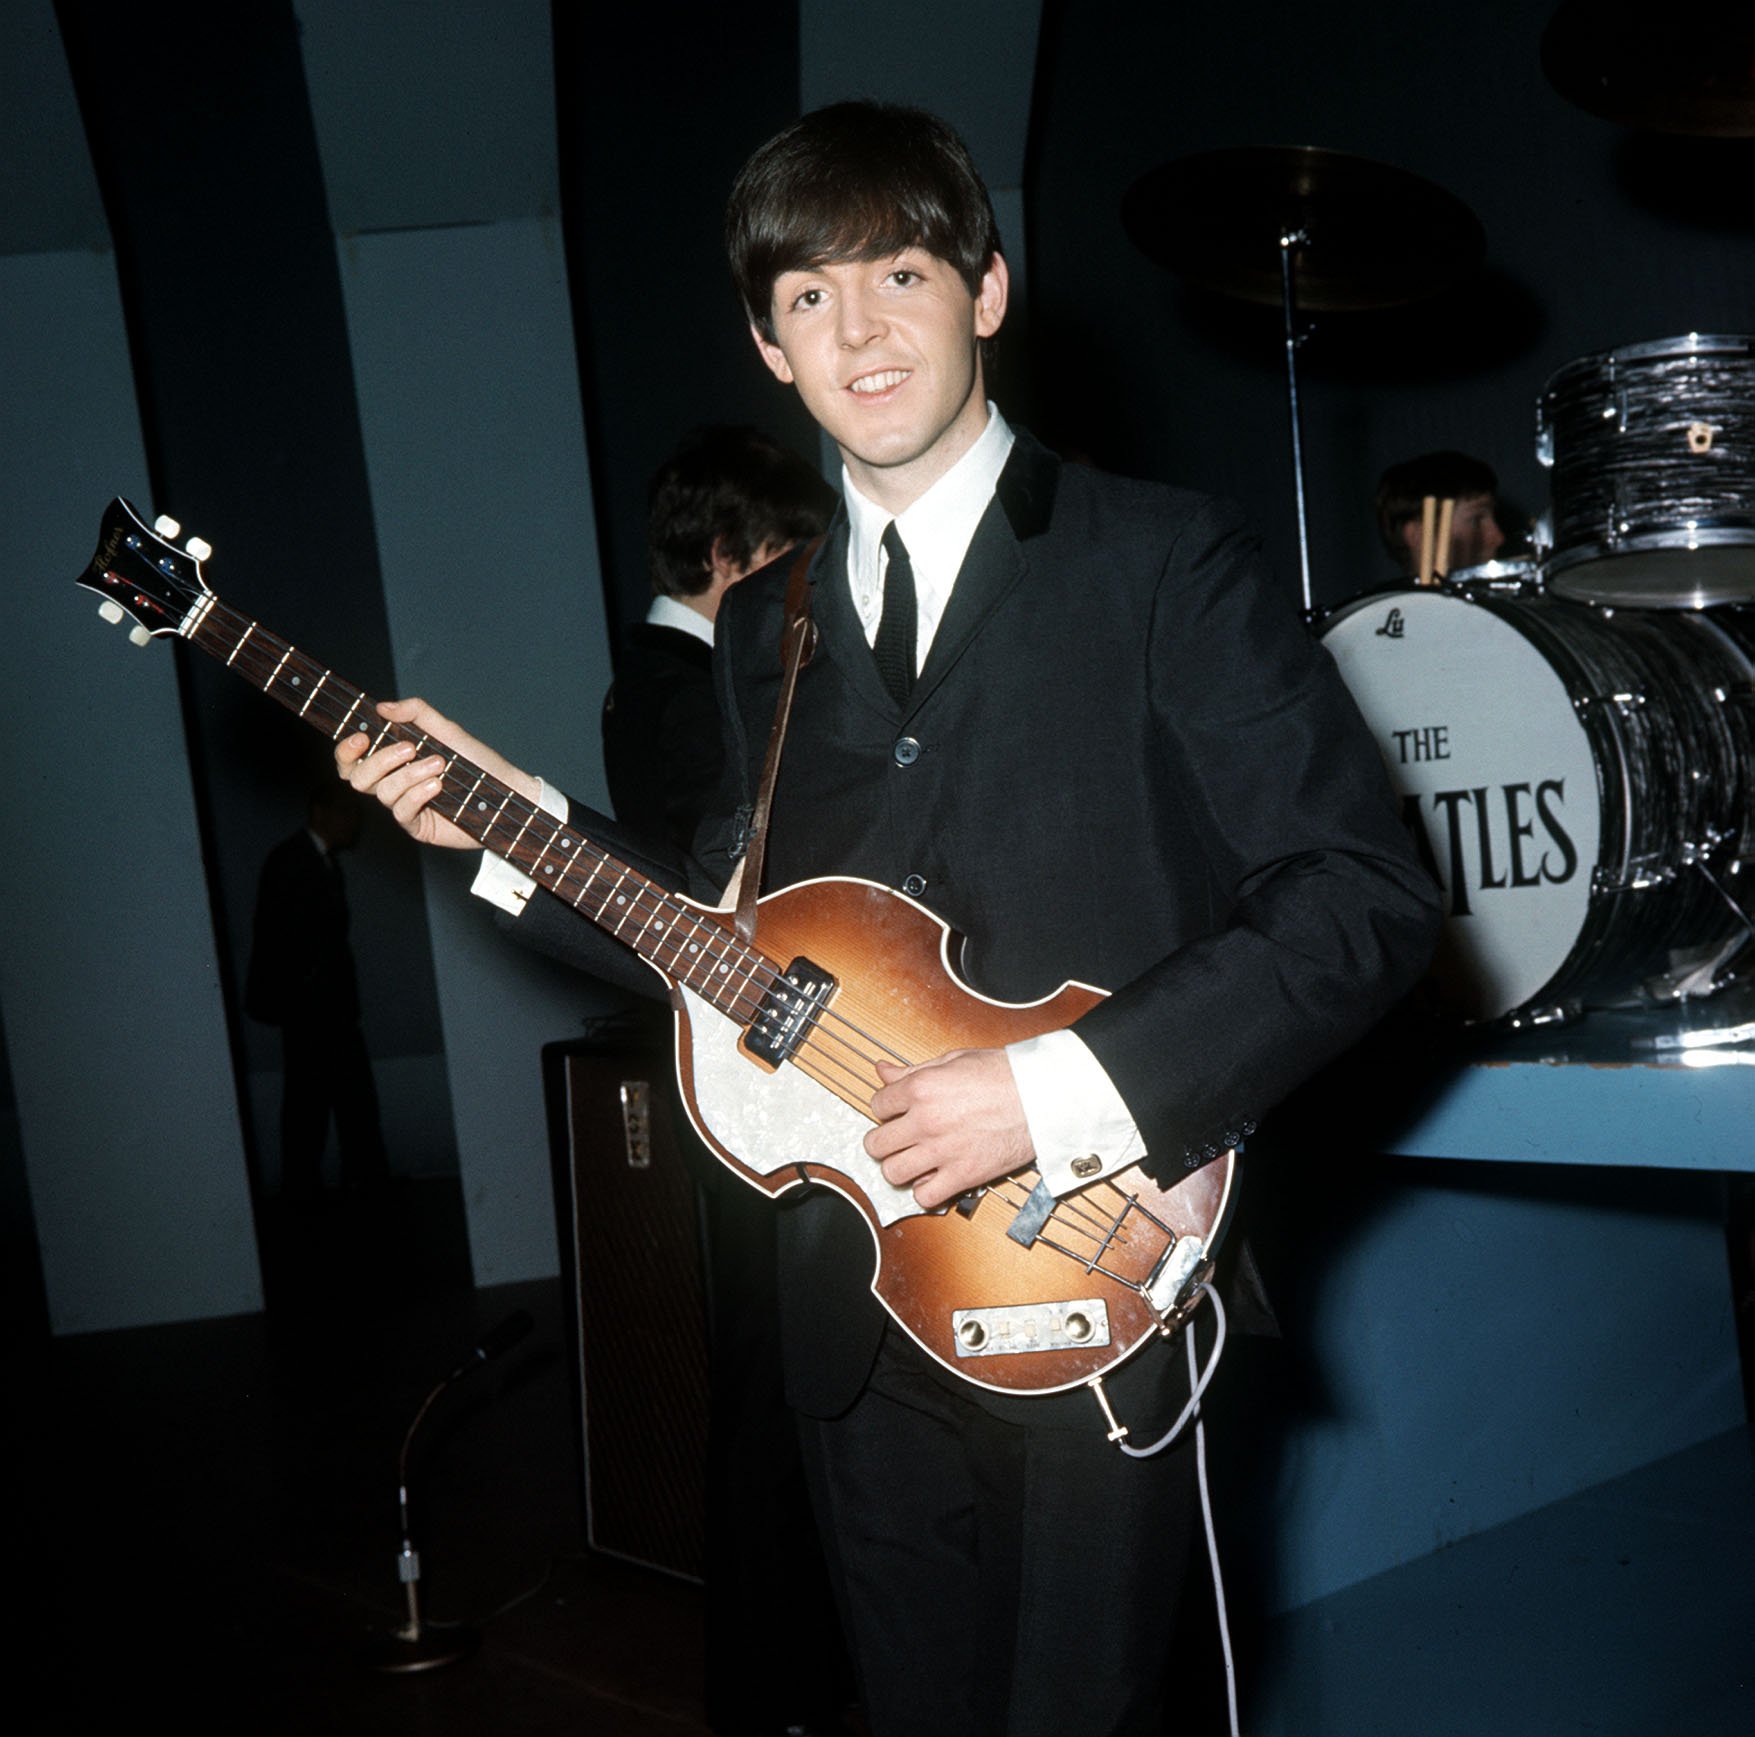 "Band on the Run" vocalist Paul McCartney holding a guitar